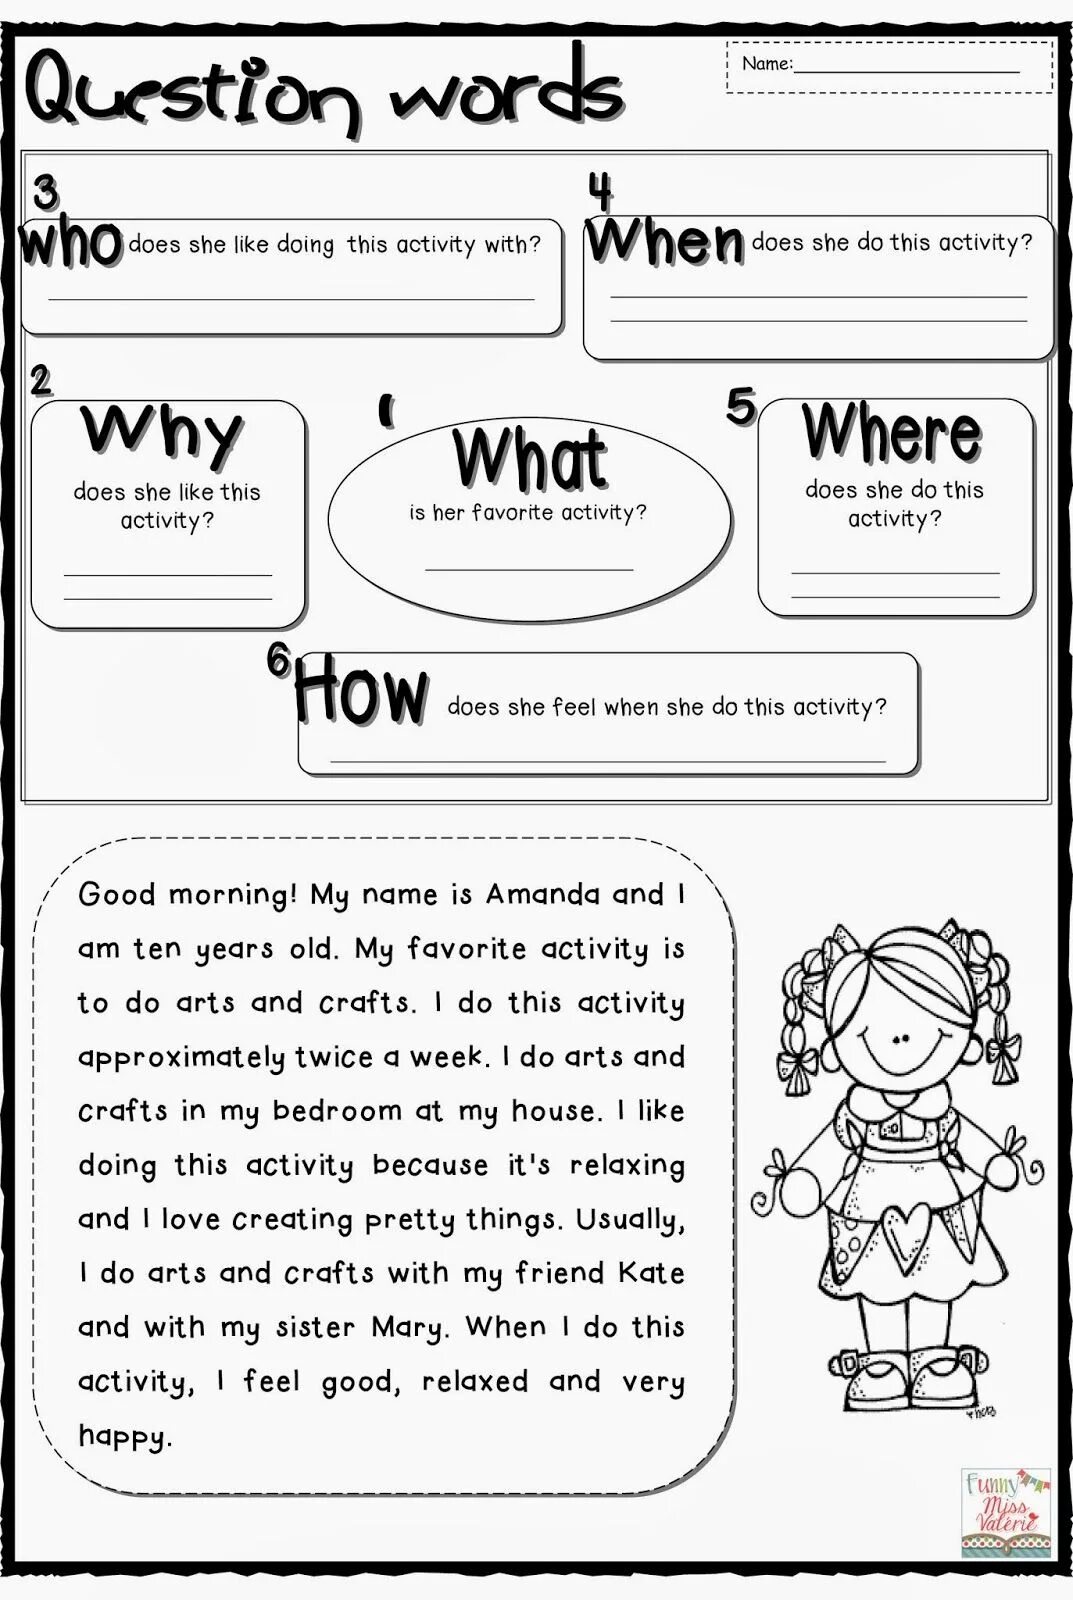 Text with question words. Вопросы Worksheets. WH questions упражнения. WH-questions в английском языке. Игра с question Words.